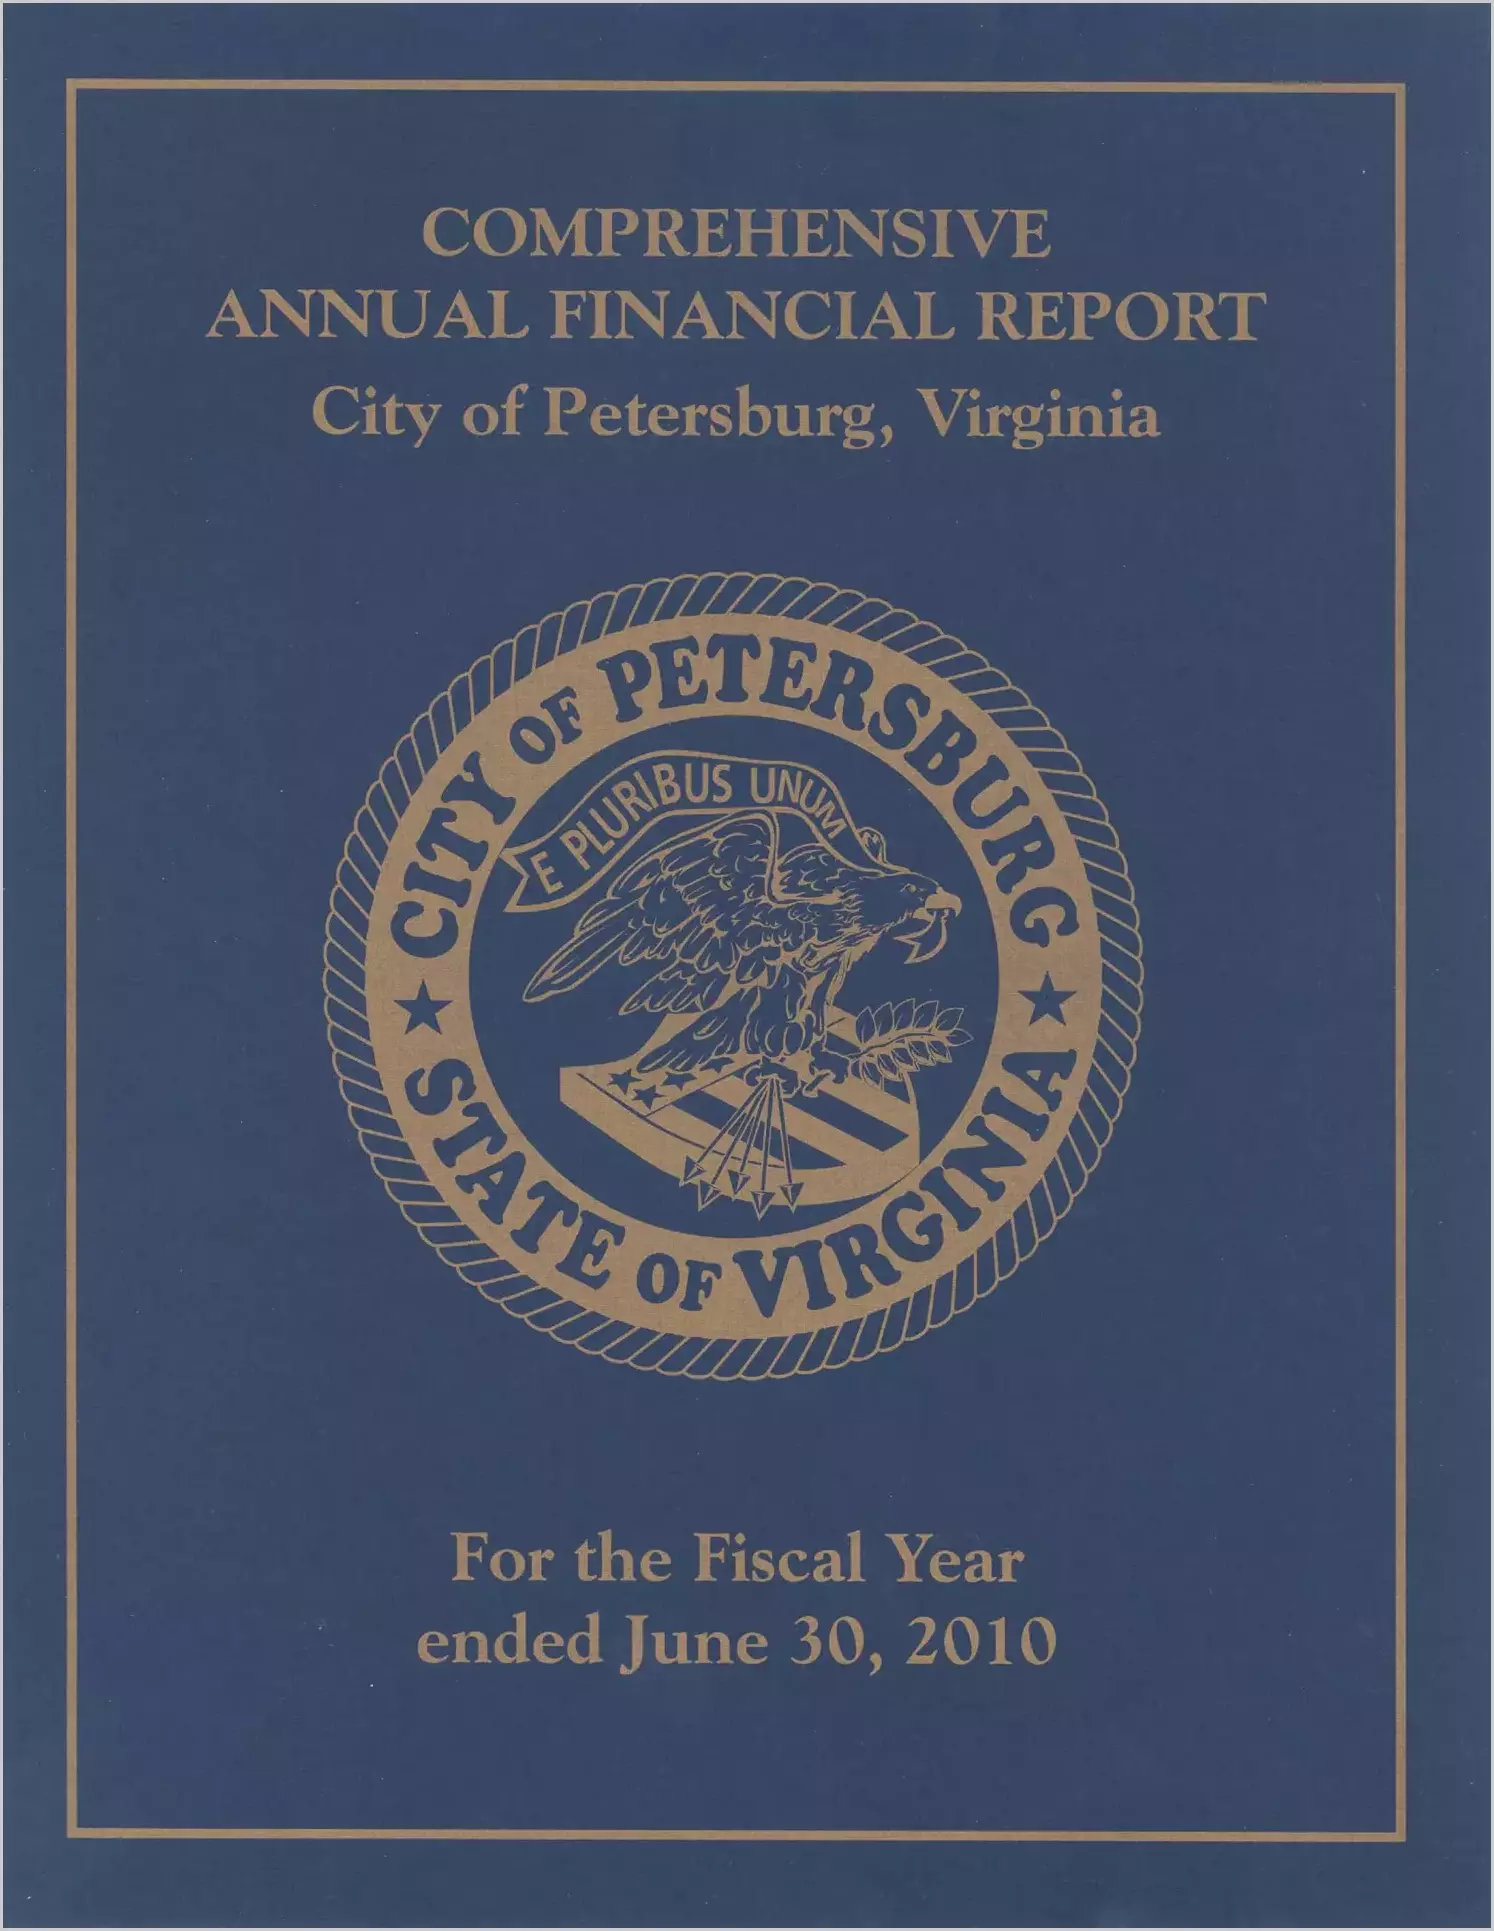 2010 Annual Financial Report for City of Petersburg